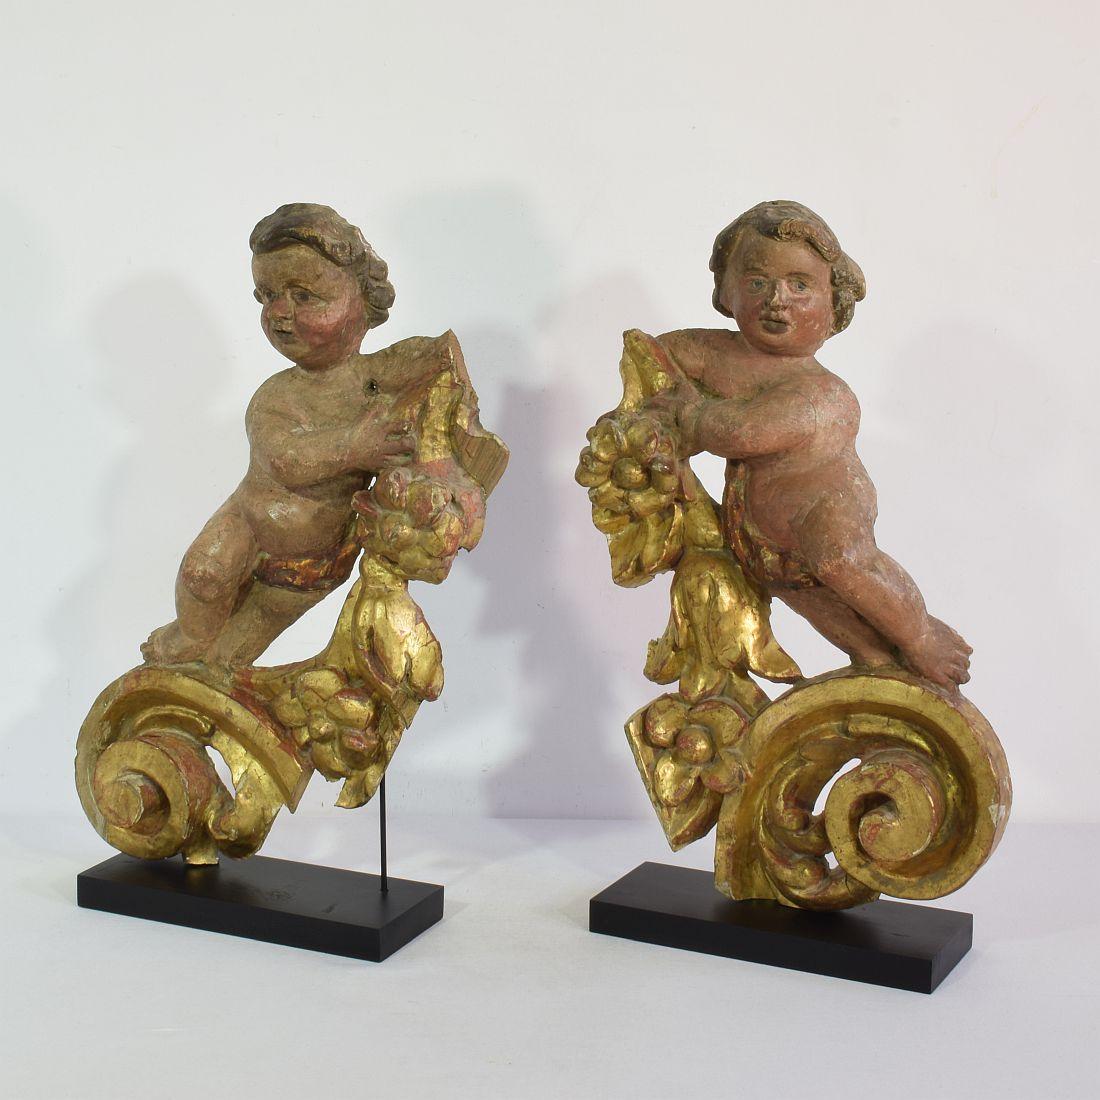 Stunning pair of carved wooden Baroque angel fragments in a beautiful naive style.
Unique period pieces. 
Italy, circa 1700-1750. Weathered, small losses and old repairs.
Measurements are individual.